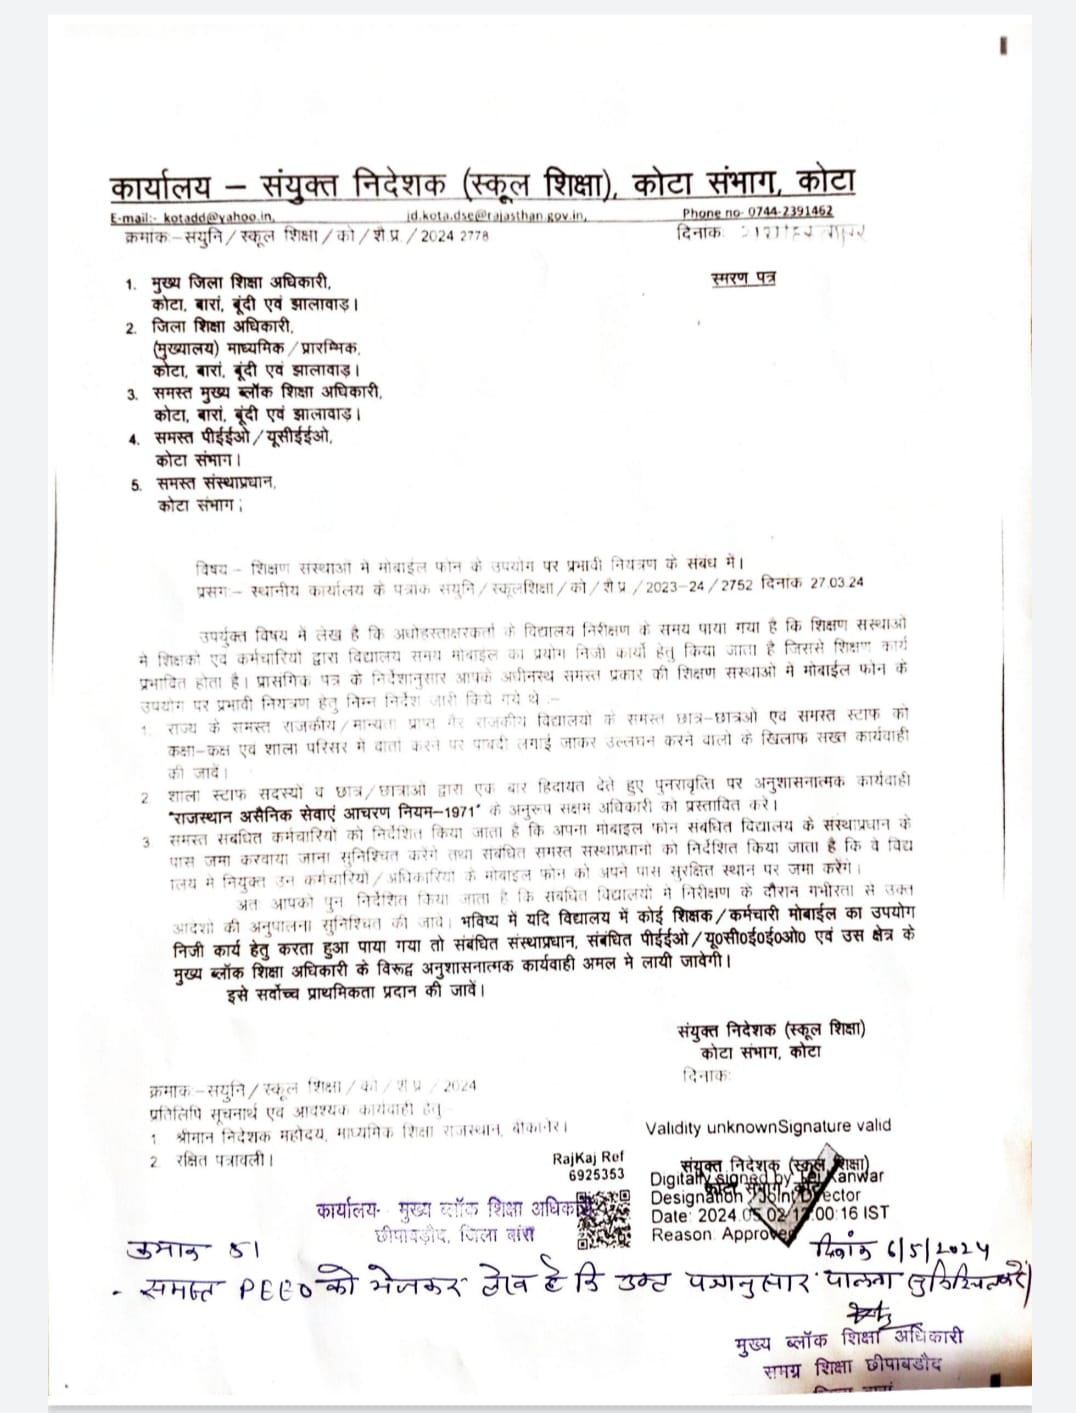 Order by Joint Director School Education banning staff from using mobille phones during school hours in Kota